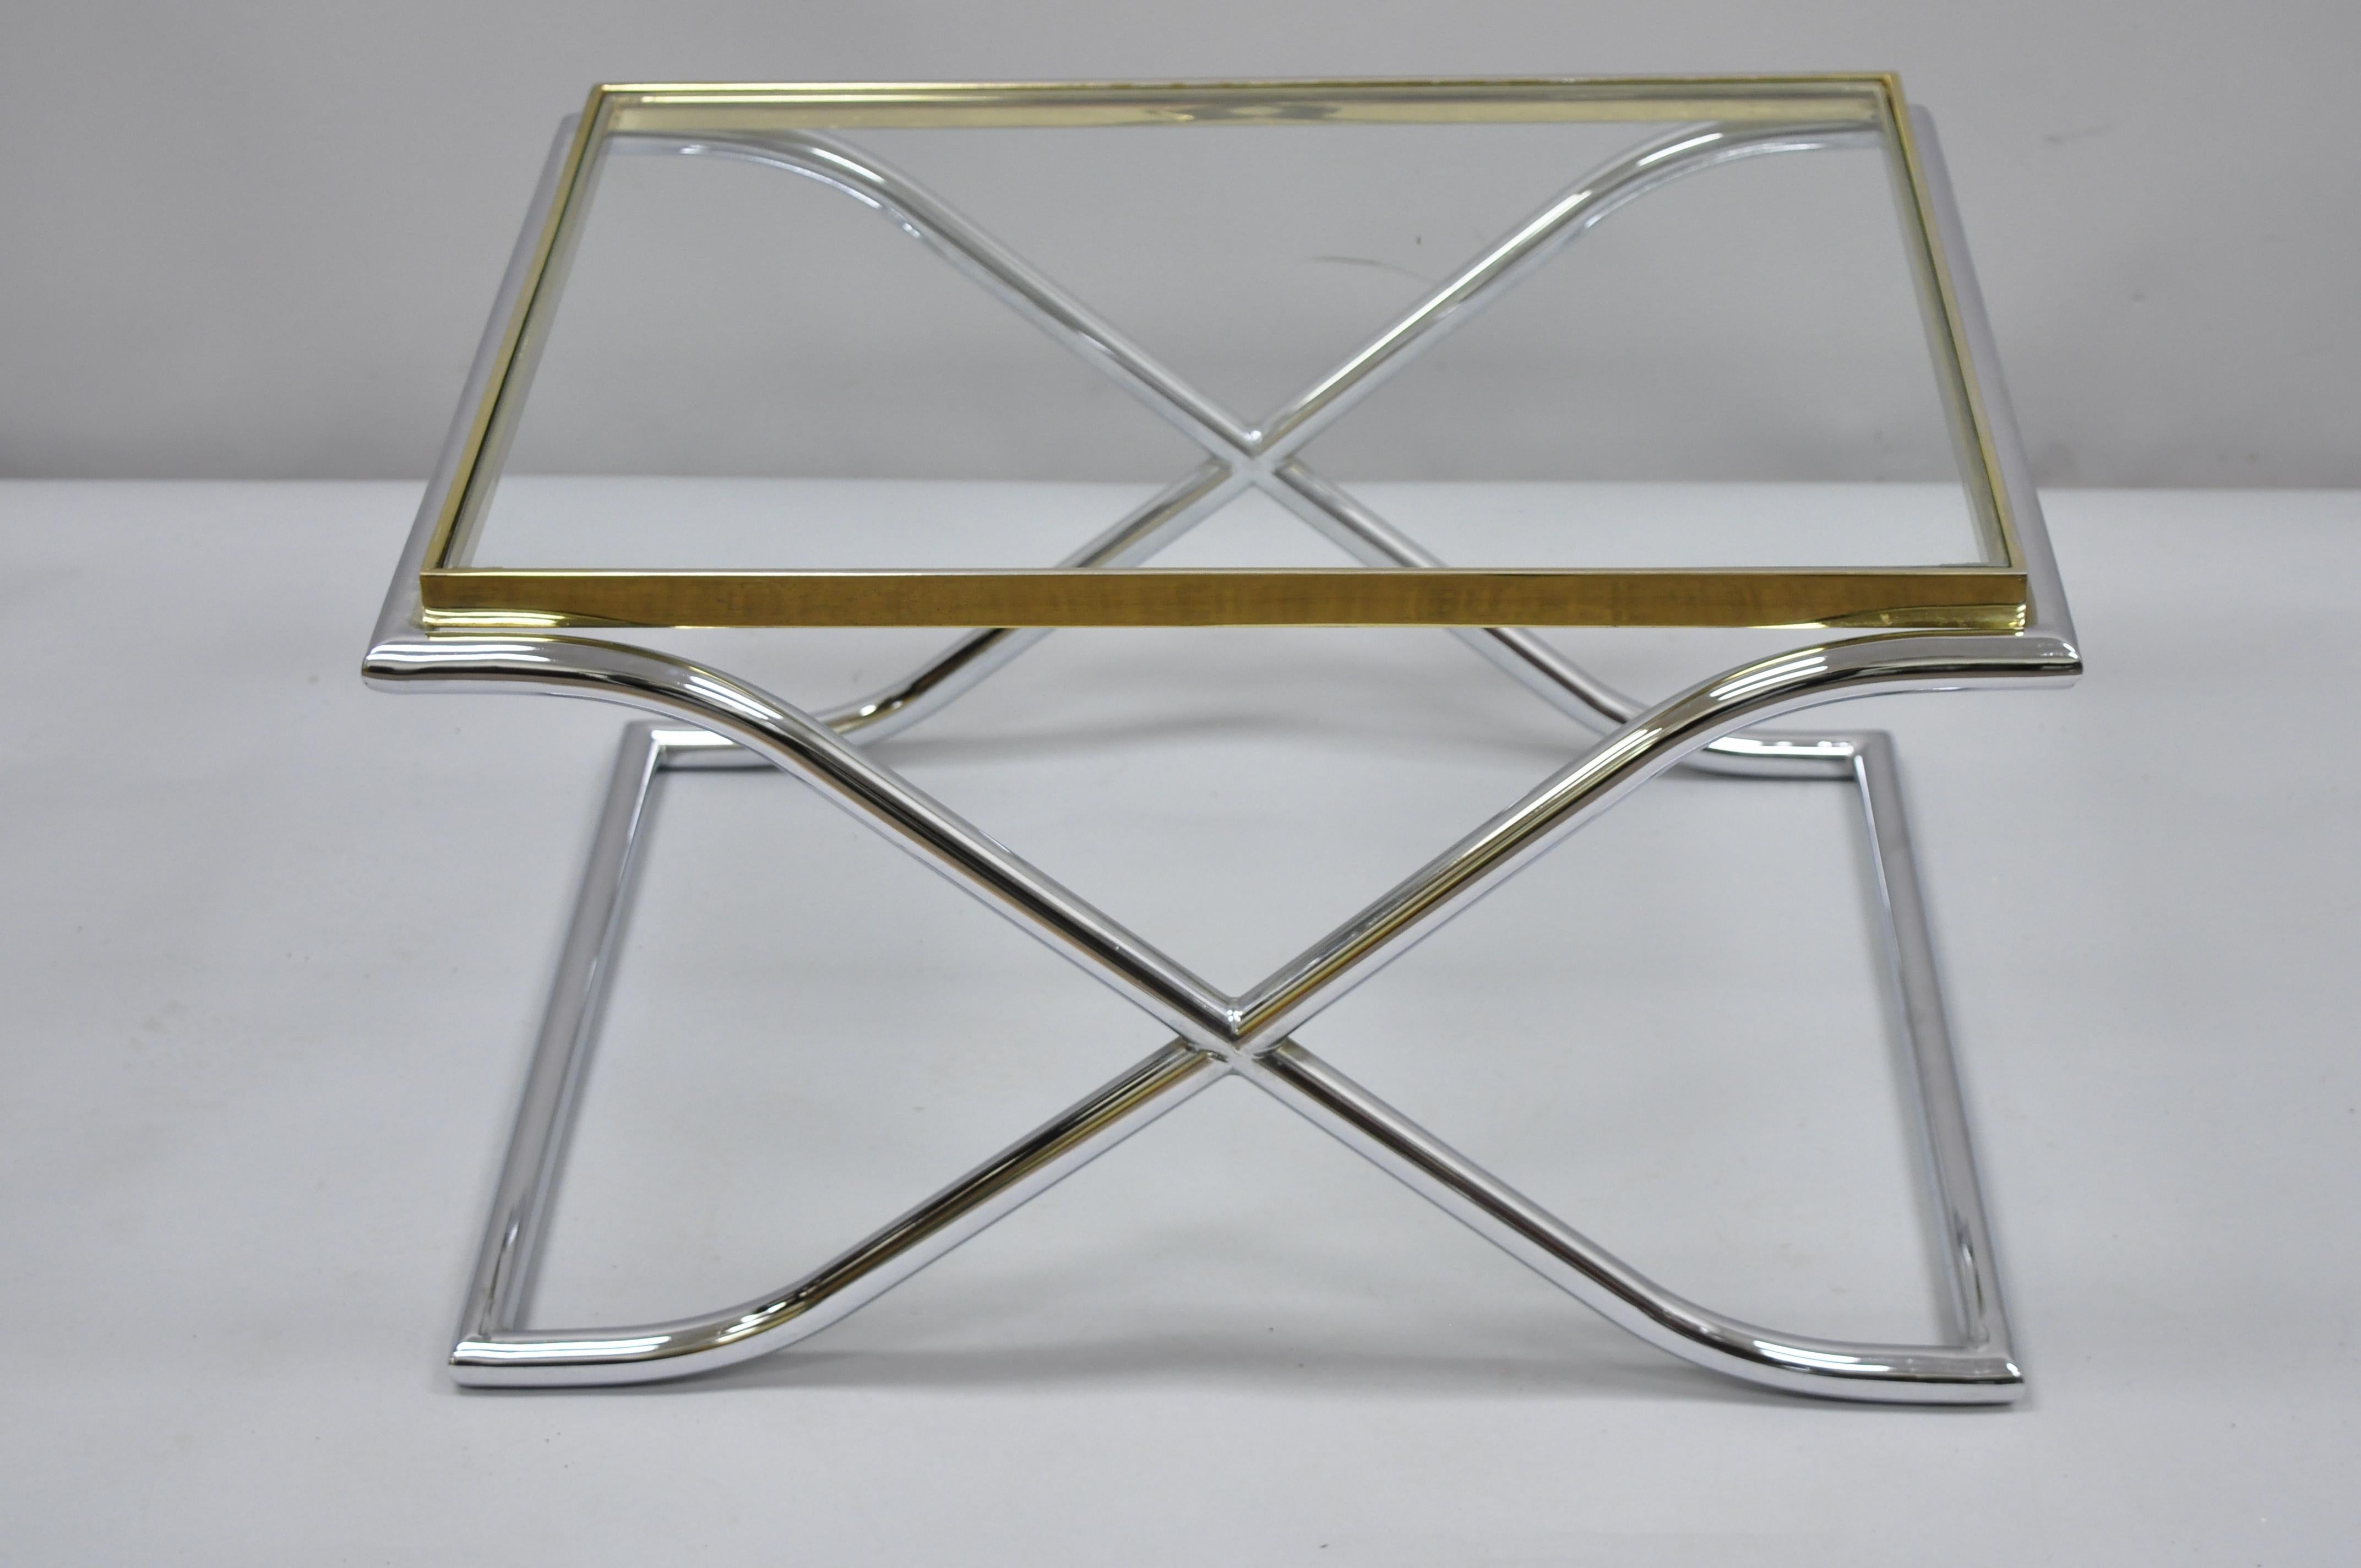 Vintage chrome, brass, and glass small Hollywood Regency X- frame coffee table. Item features chrome X- frame base, brass rim, inset glass top, great style and form, circa 1970. Measurements: 16.5